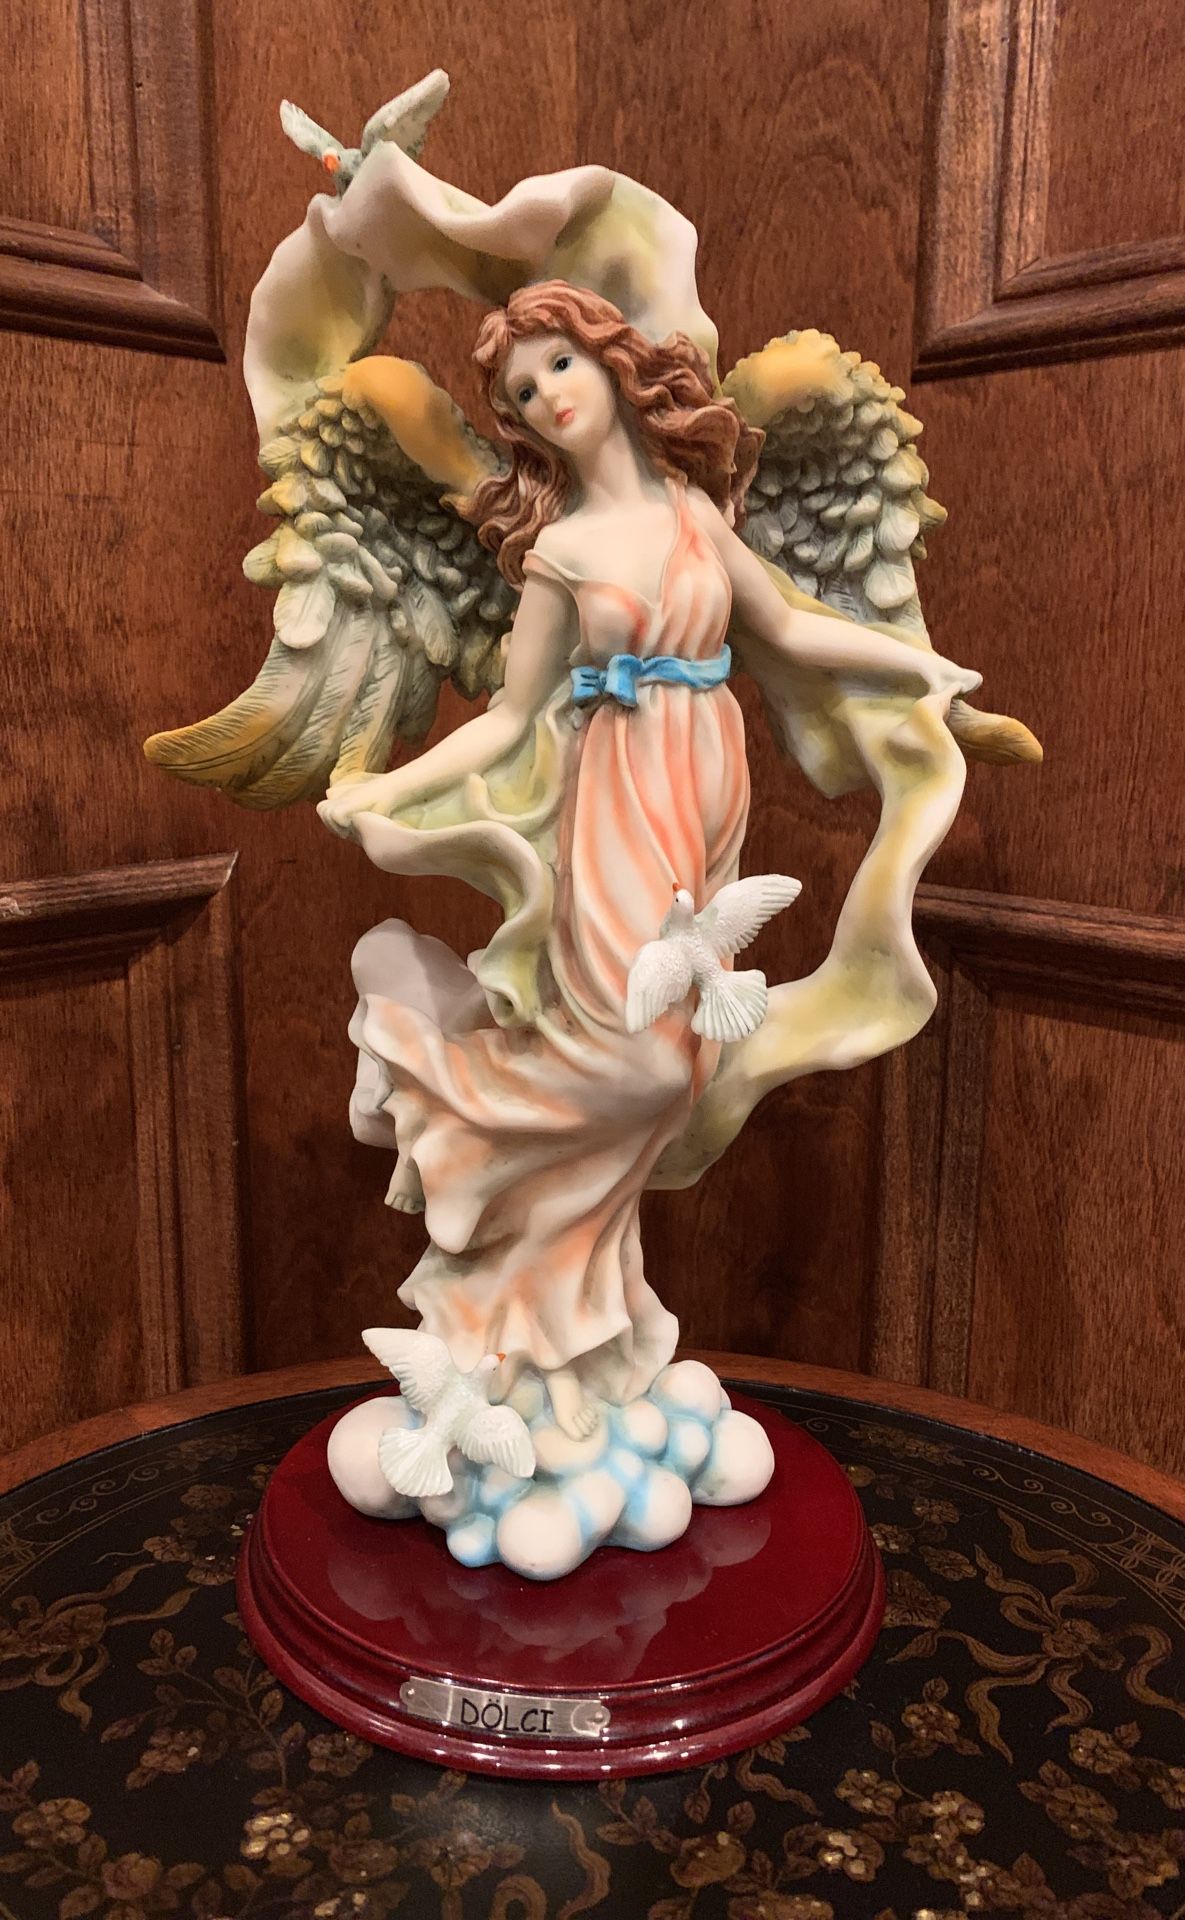 Collectible! Dolci Angel Sculpture / Figurine / Statue in Flowing Gown on a Cloud w/ Beautiful Wings and Doves - Coral, Sage, Blue, and Golden Accents